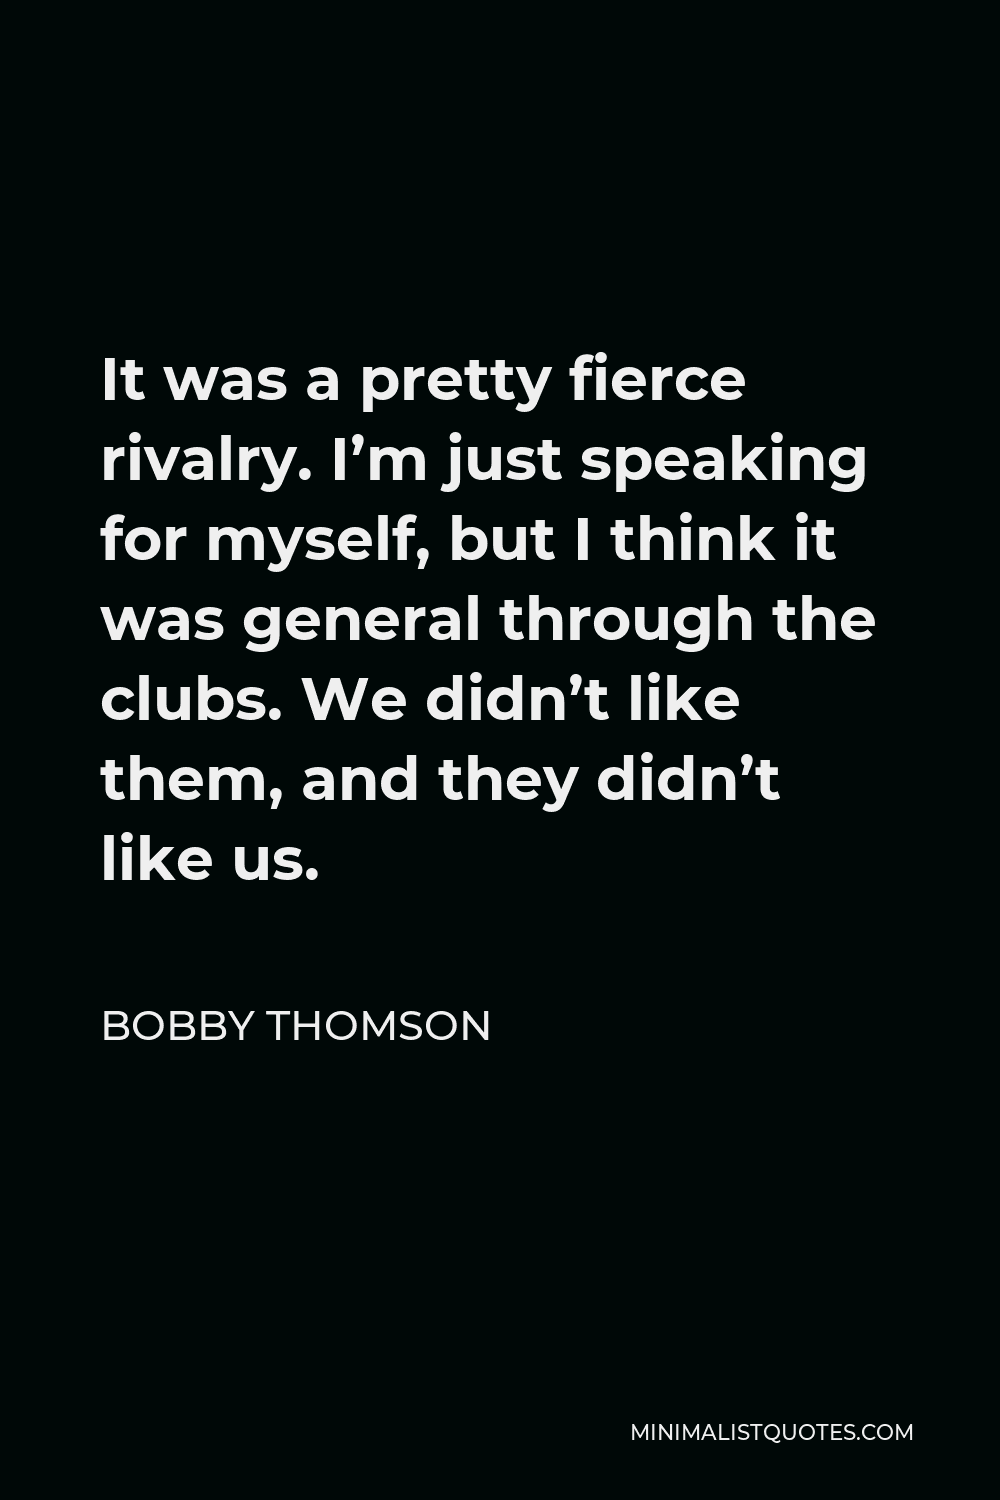 Bobby Thomson Quote - It was a pretty fierce rivalry. I’m just speaking for myself, but I think it was general through the clubs. We didn’t like them, and they didn’t like us.